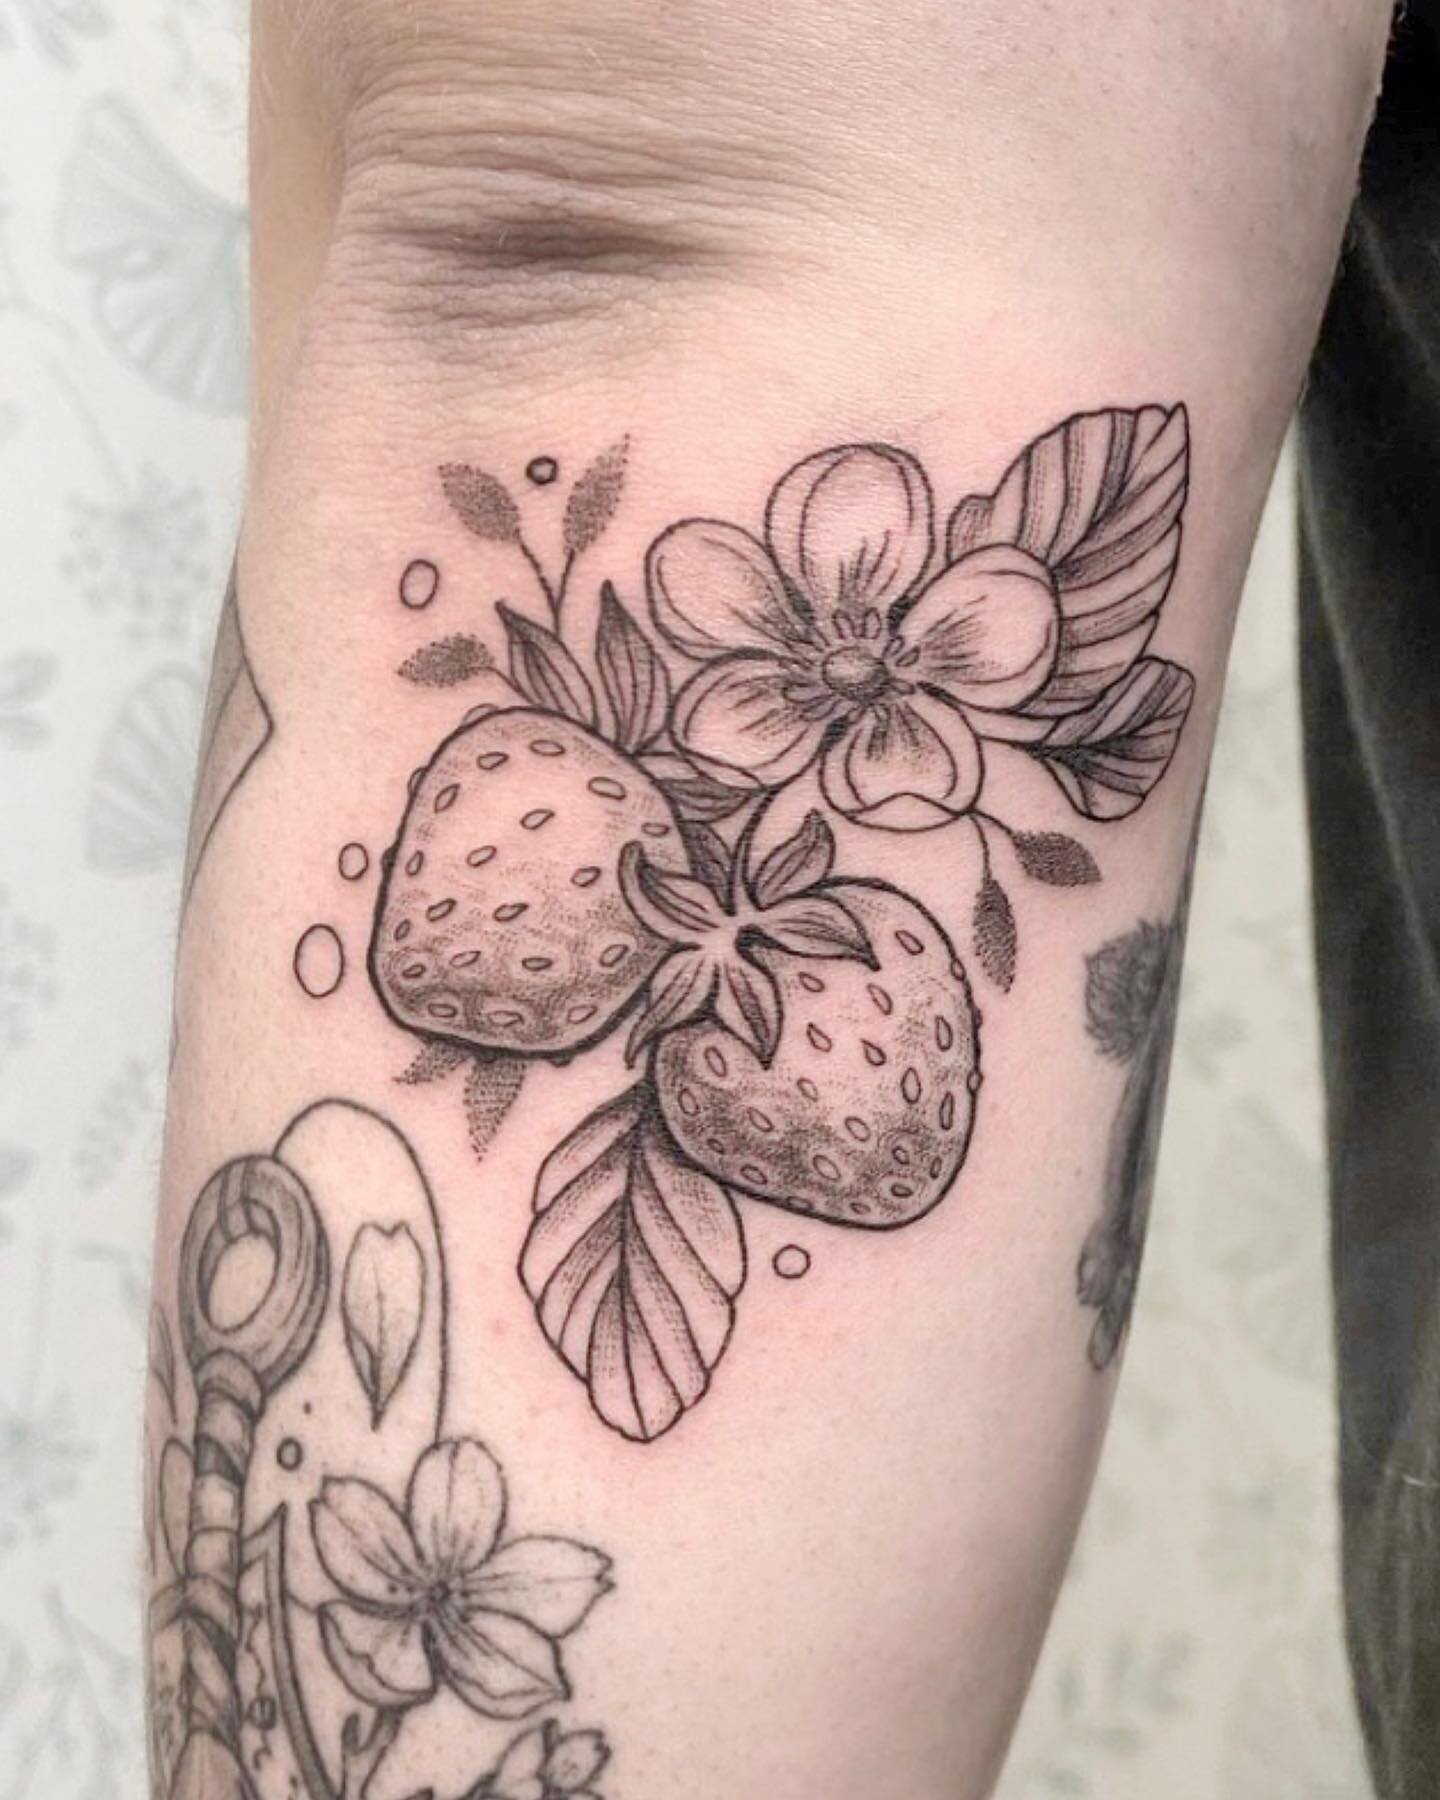 🎵Look at you, strawberry&hellip;.. elbow? 🎵
Sydney @hrtshpdfruit did this super cute strawberry filler, and it&rsquo;s a perfect design for the end of summer! 🍓
.
.
.
.
.
#strawberry #strawberrytattoo #fruittattoo #illustrativetattoo #illustration